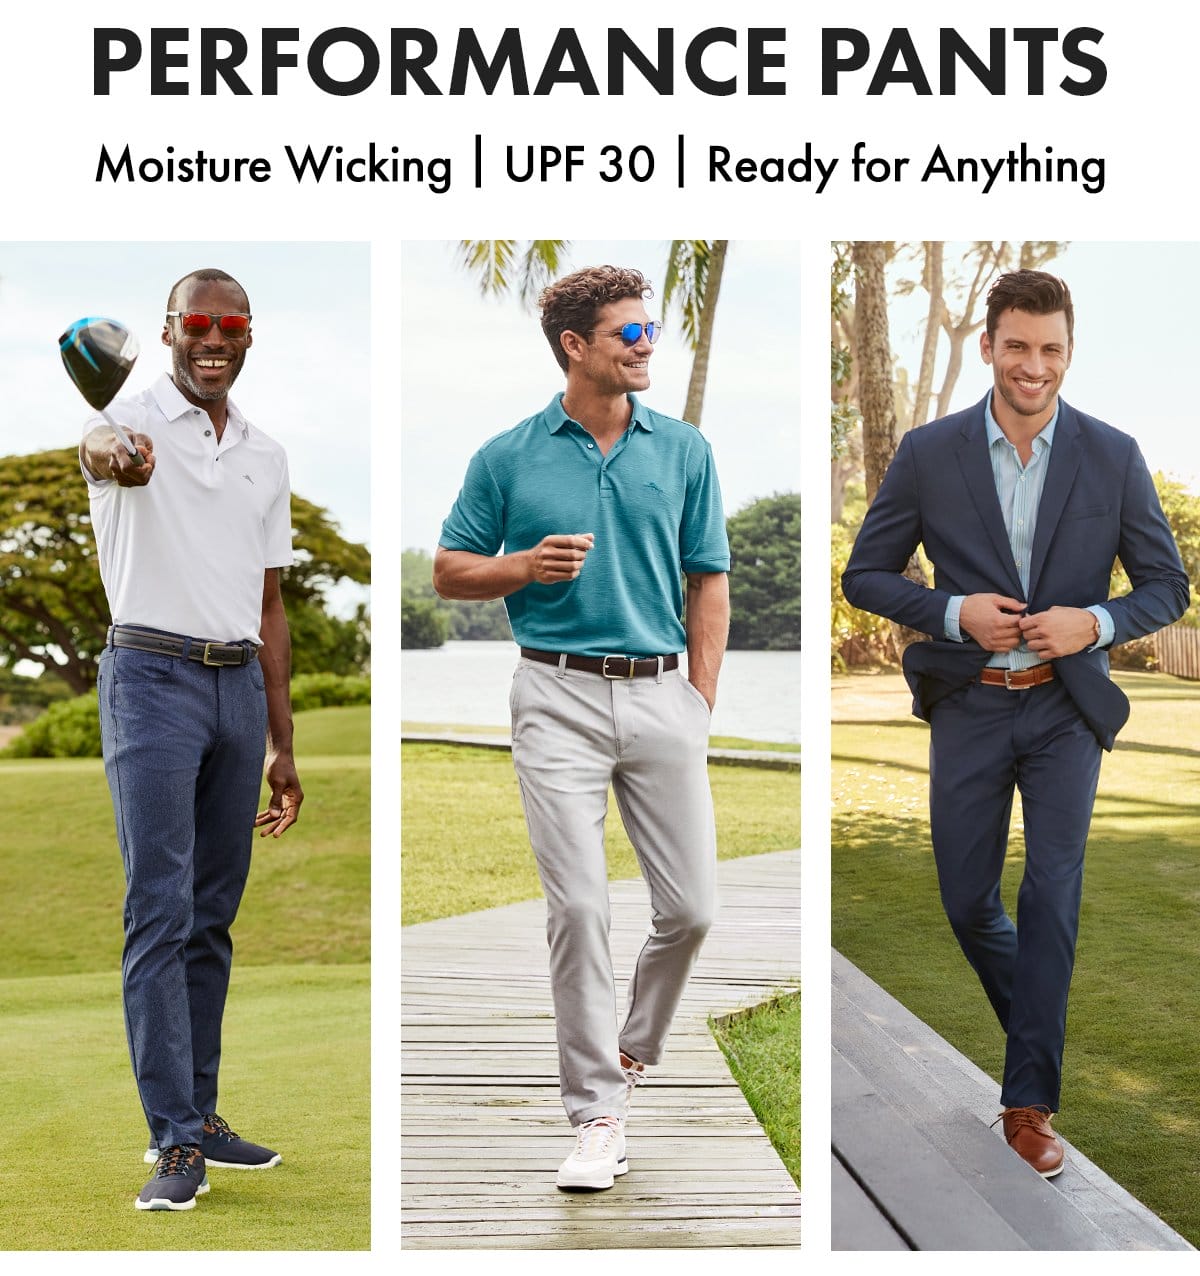 Performance Pants | Moisture Wicking | UPF 30 | Ready for Anything